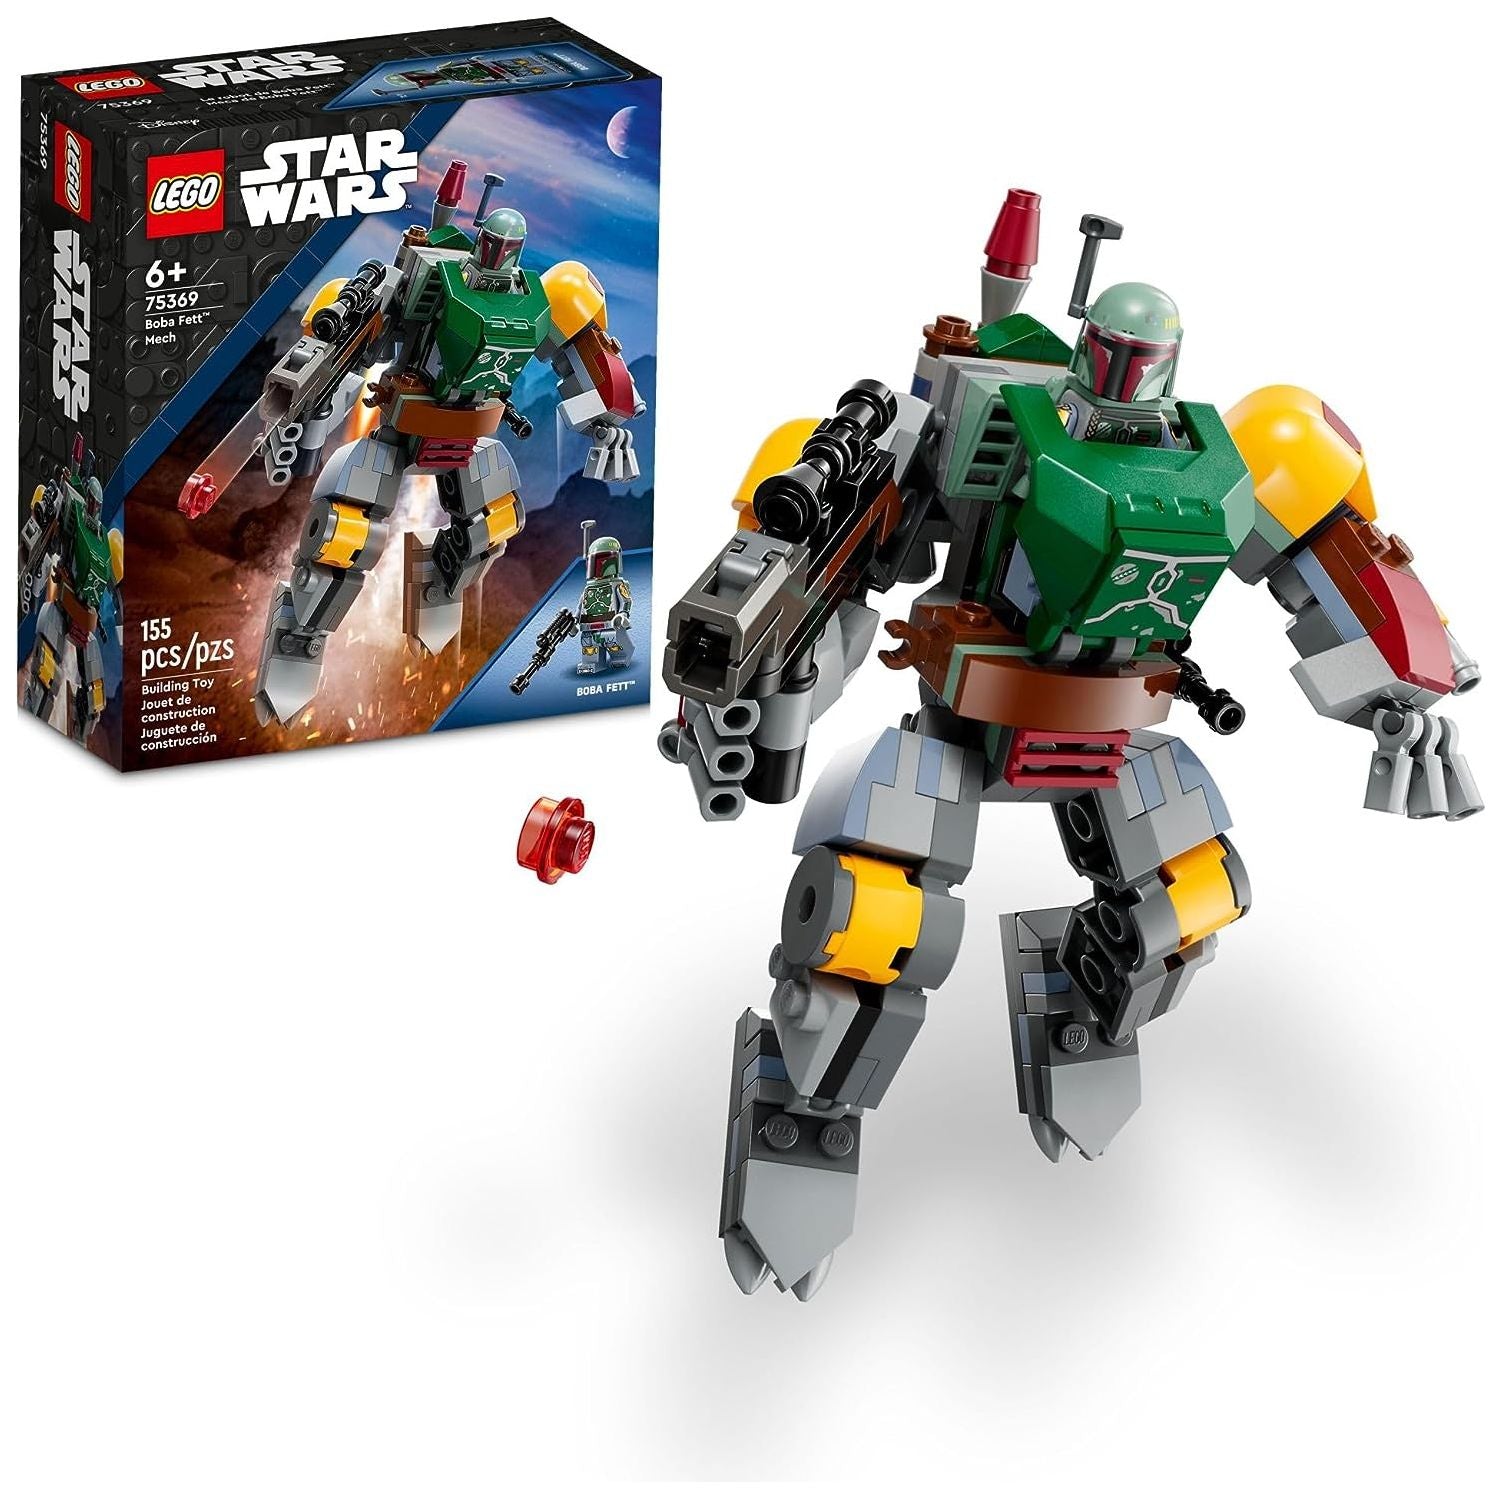 LEGO Star Wars 75369  Boba Fett Mech Buildable Star Wars Action Figure, This Posable Mech Inspired by The Iconic Star Wars Bounty Hunter Features a Buildable Shield, Stud Blaster and Jetpack